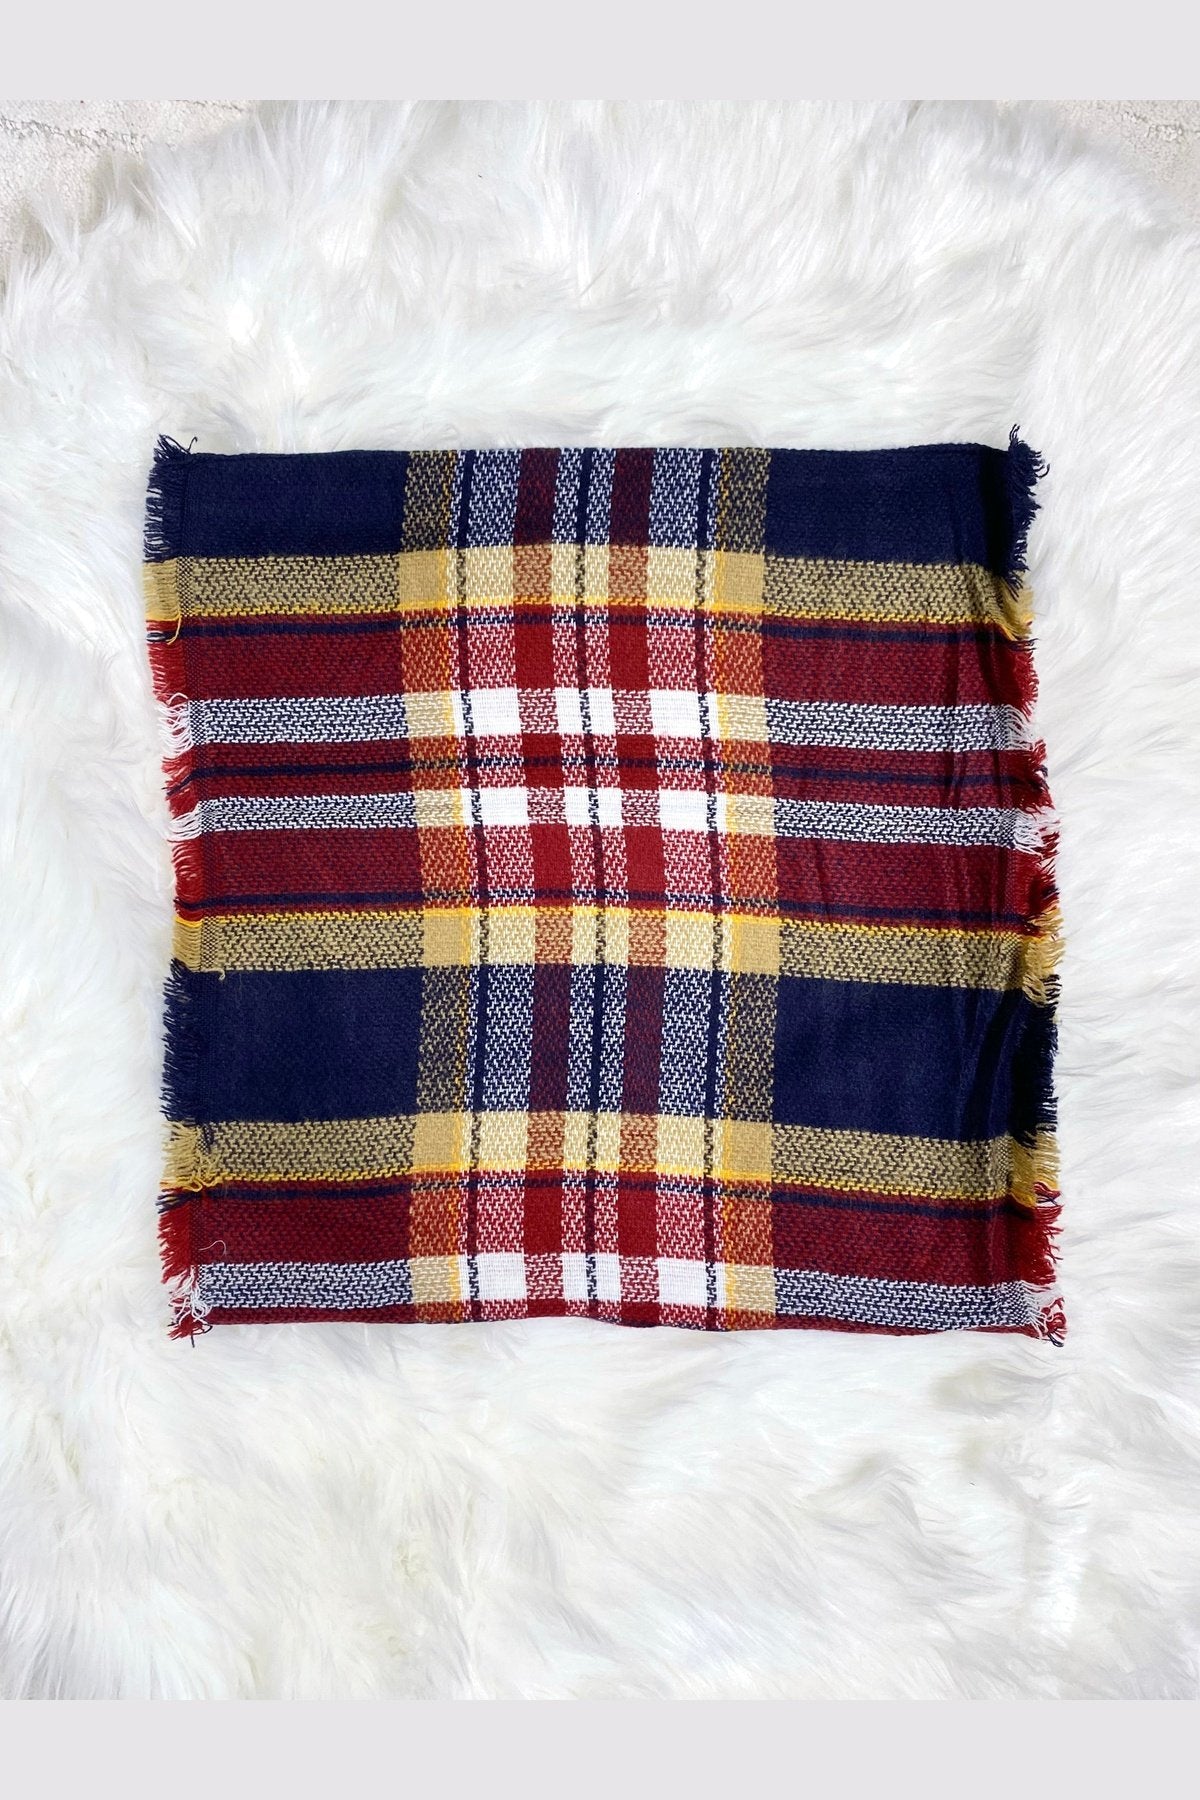 Infinity Scarf - White, red, navy, yellow